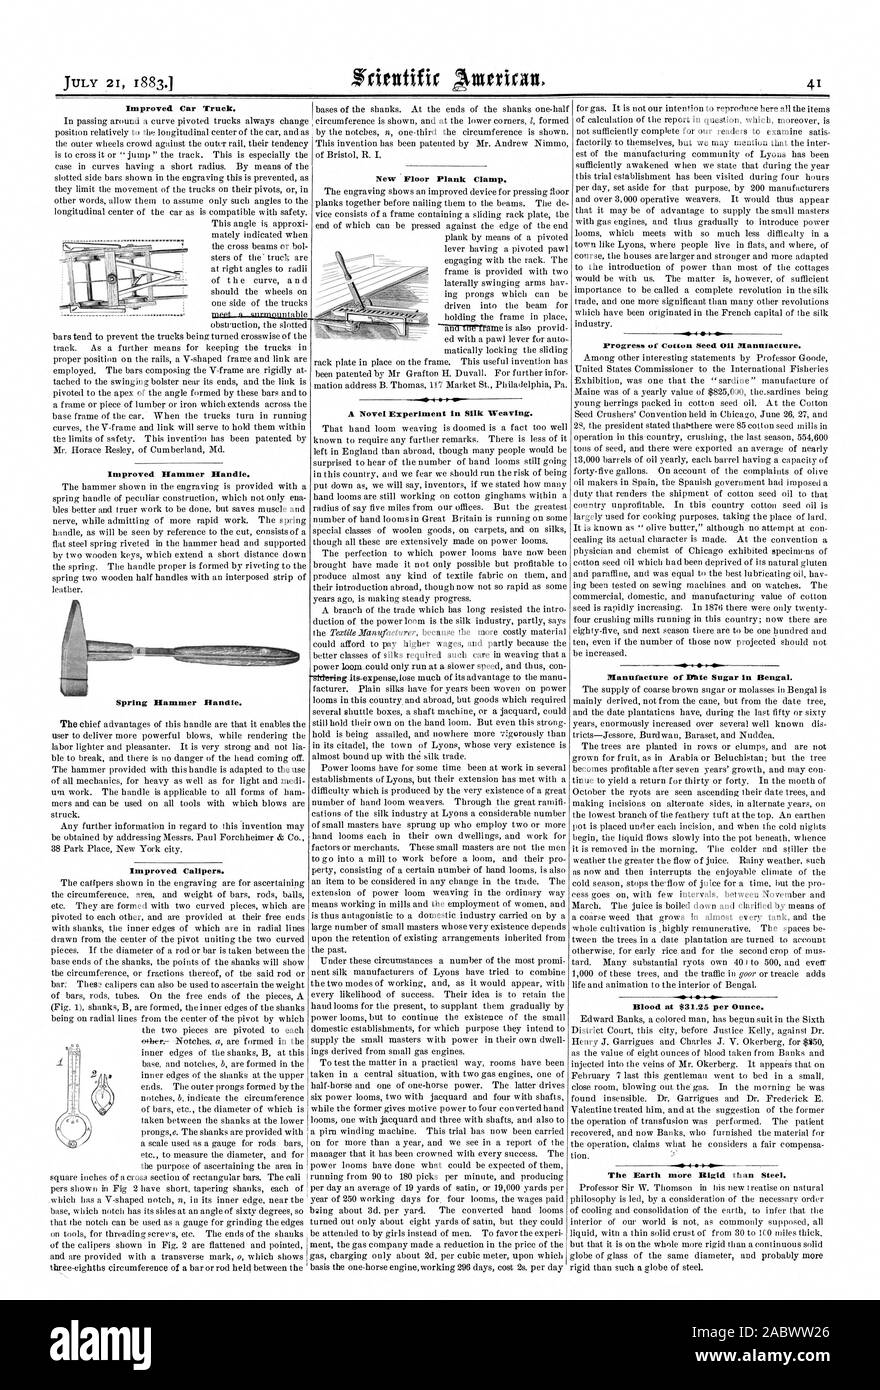 Improved Hammer Handle. Spring Hammer Handle. Improved Calipers. Improved Car Truck. A Novel Experiment in Silk Weaving. Manufacture of Mite Sugar in Bengal. AS 4  The Earth more Rigid than Steel., scientific american, 1883-07-21 Stock Photo